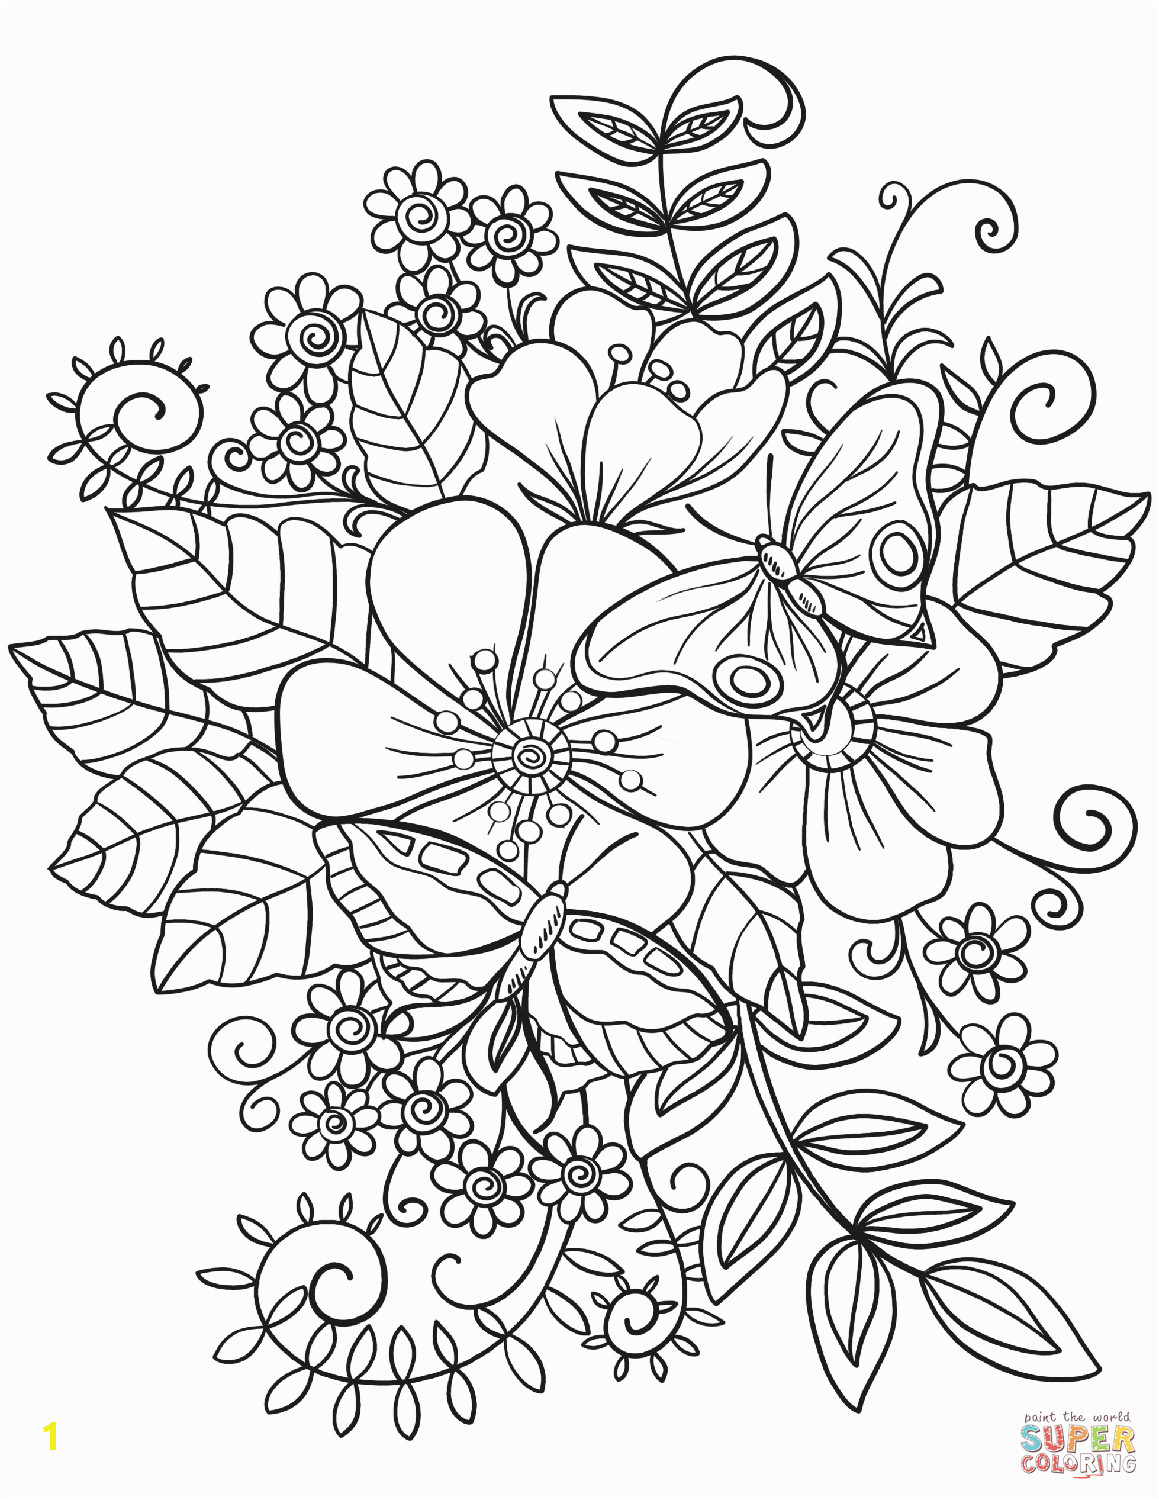 butterflies and flowers drawing